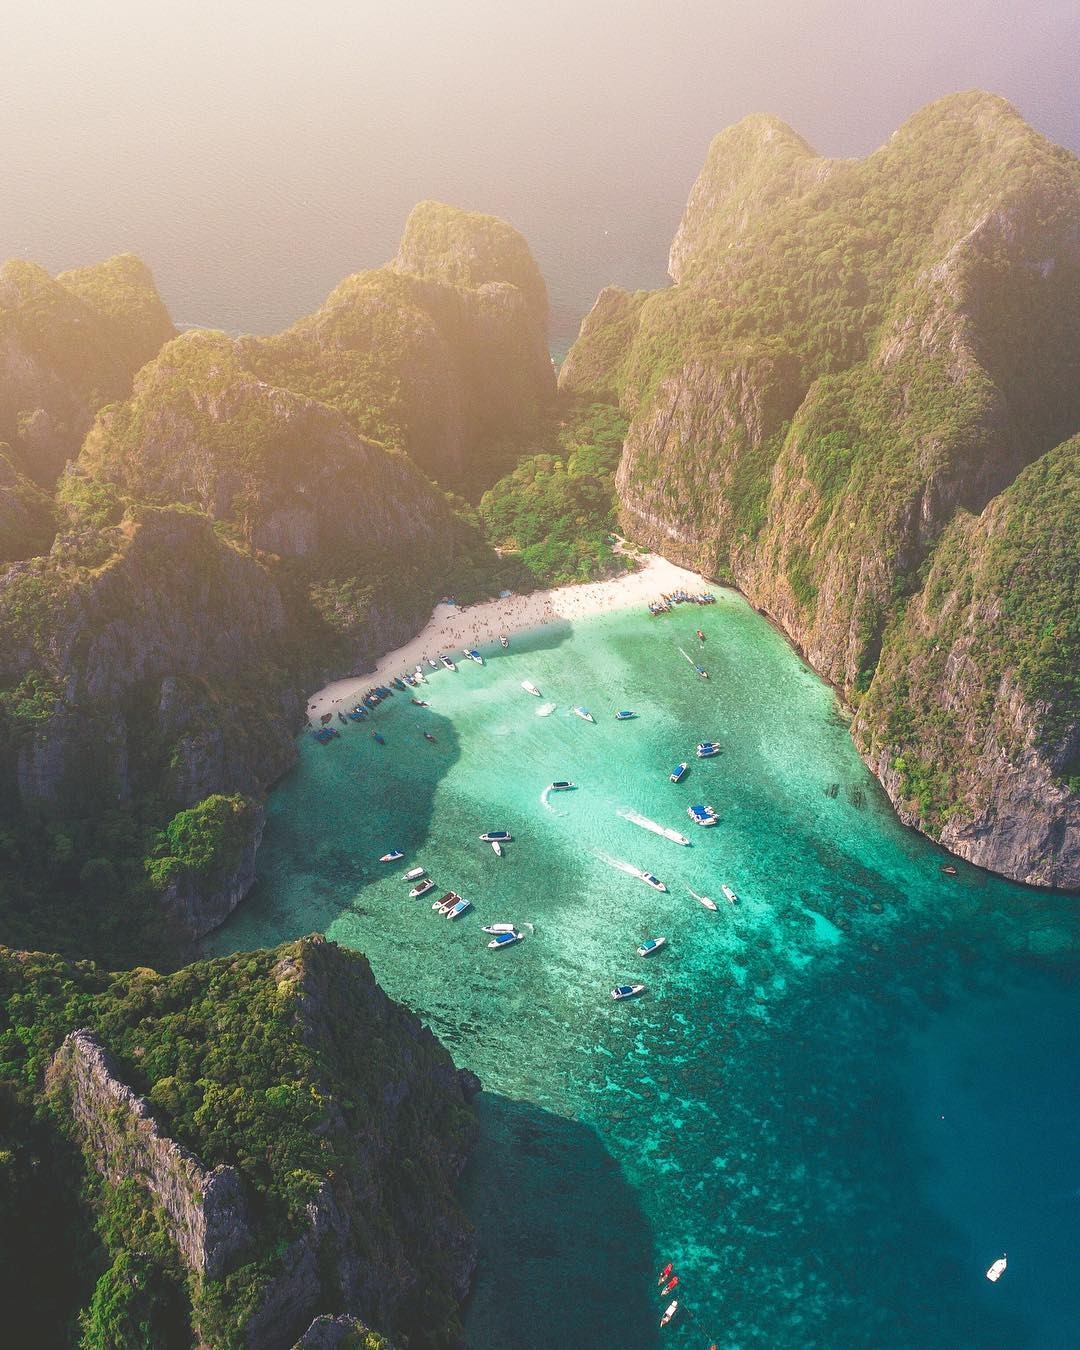 One of the many places Instagram jet-setting Joel Chia has photographed with his drones: Maya Bay, made famous by the film The Beach starring Leonardo DiCaprio in 2000. Photo: Joel Chia/Instagram